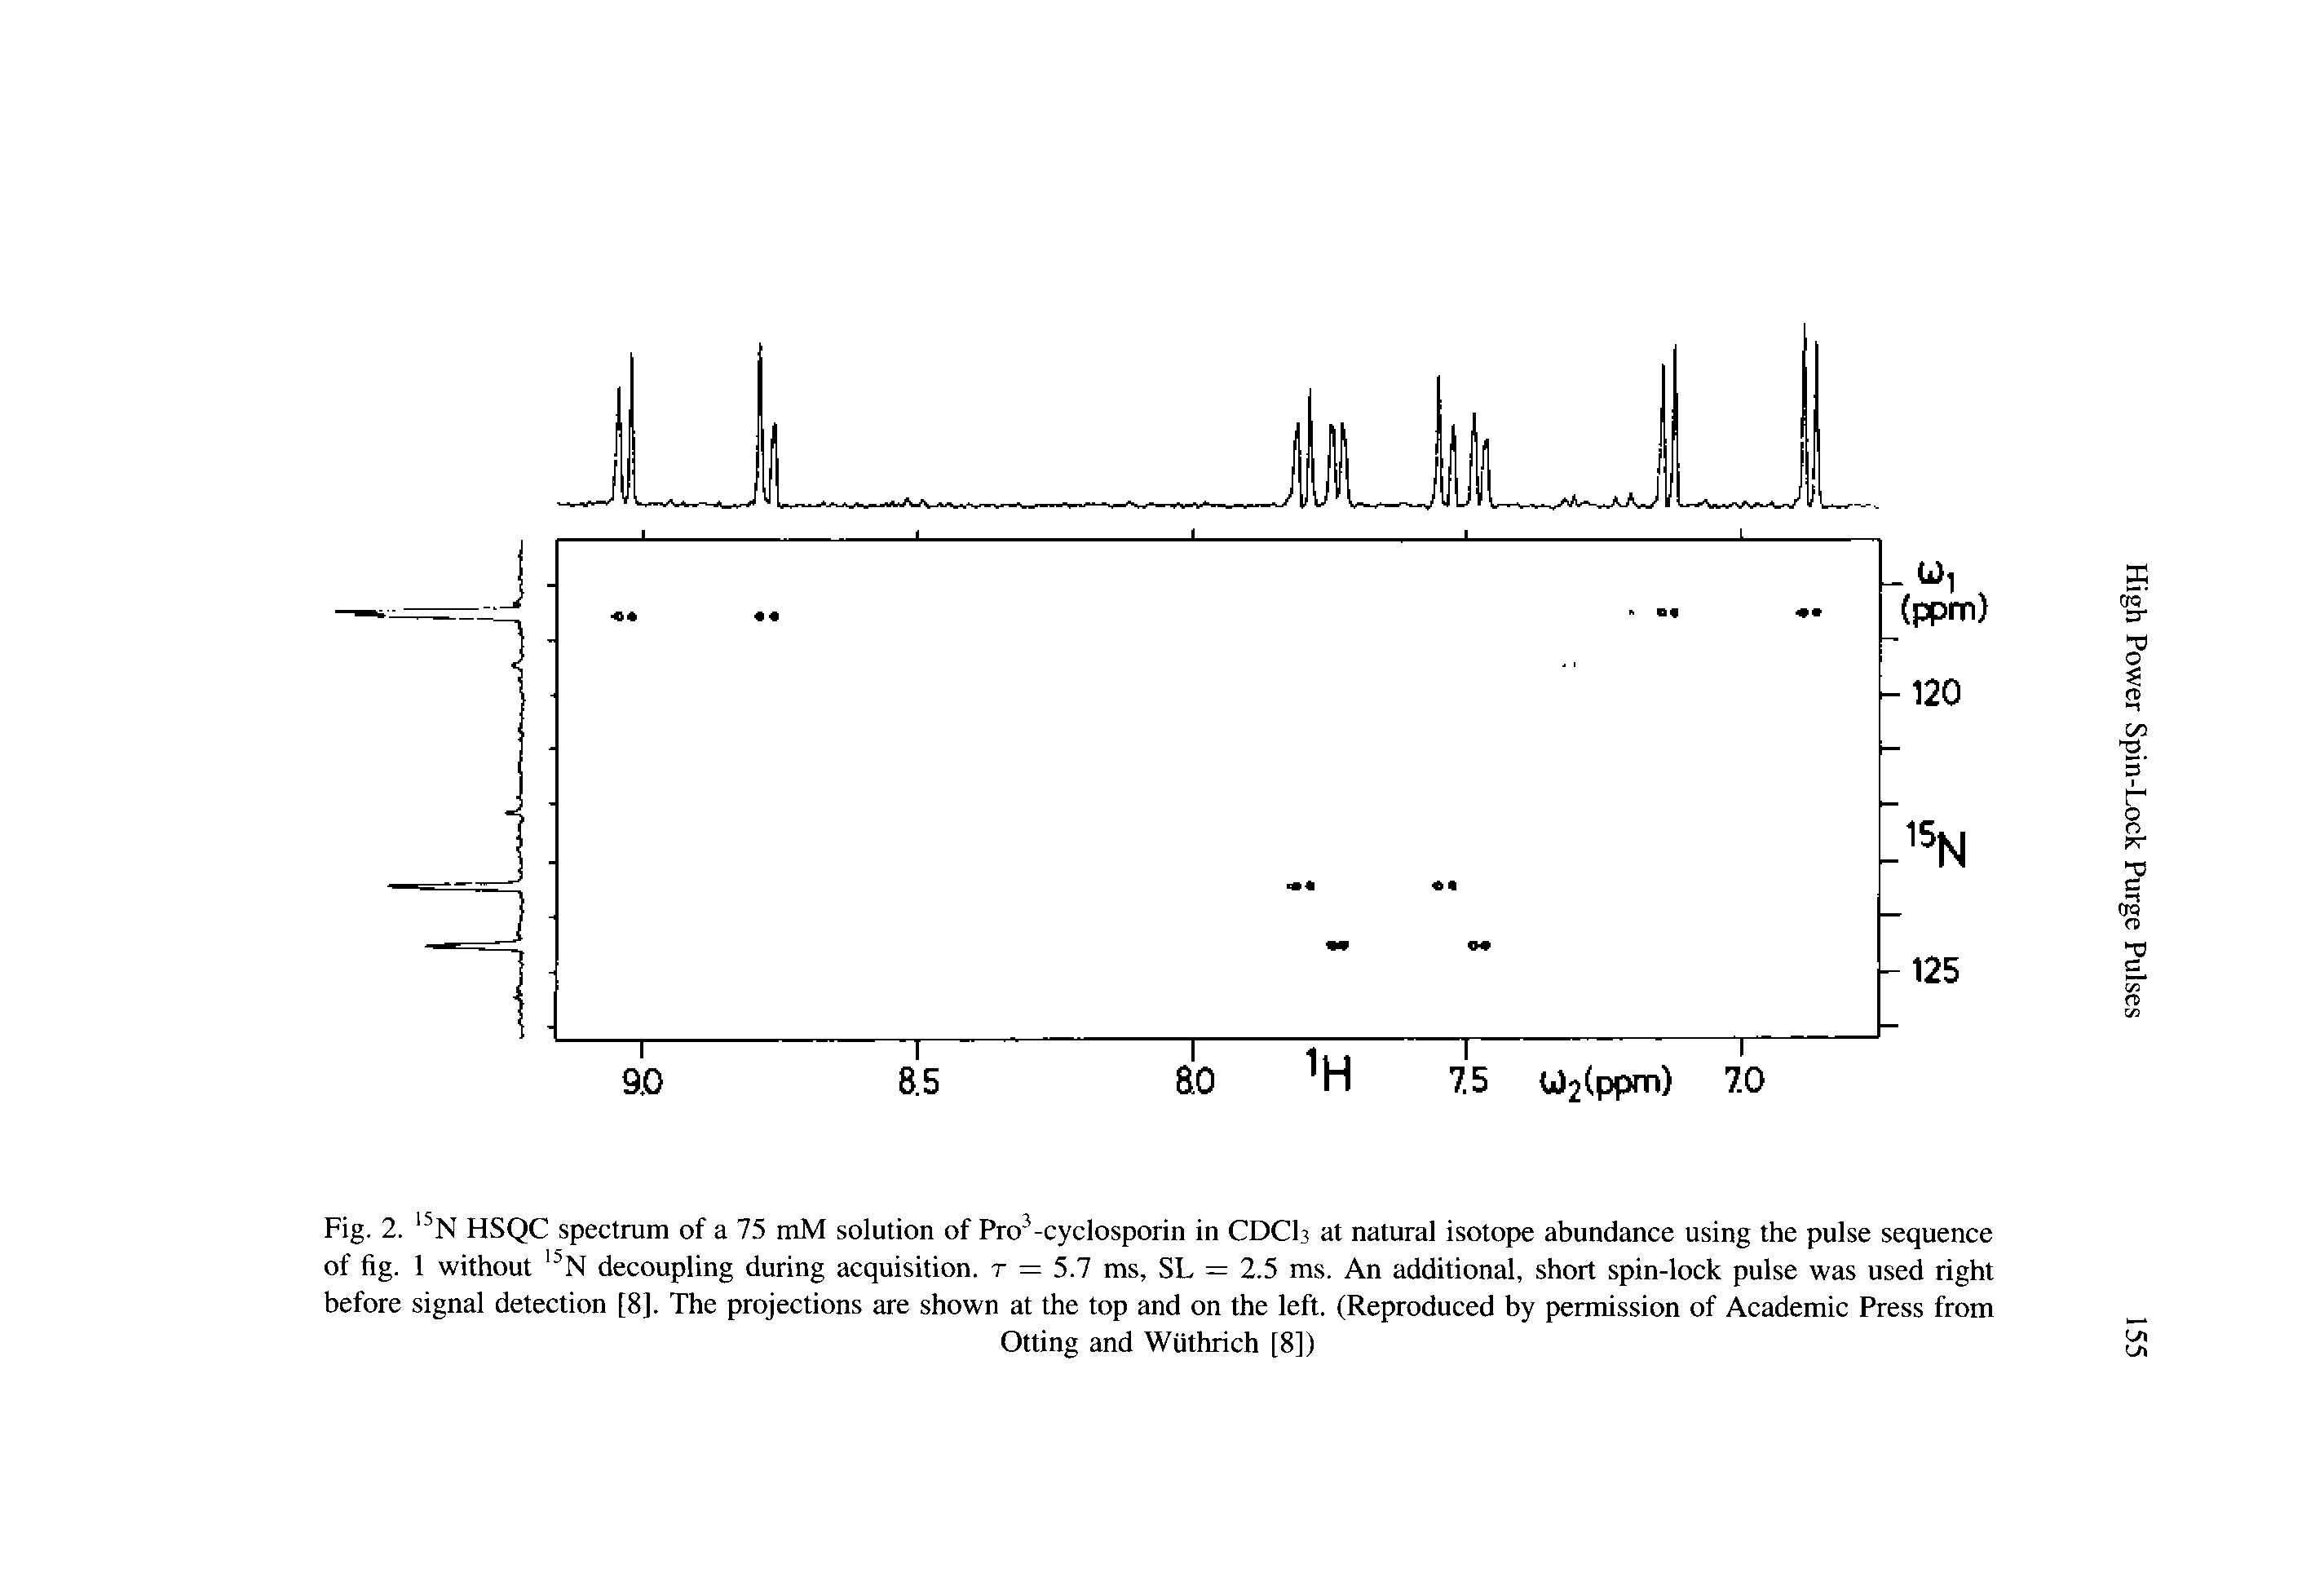 Fig. 2. N HSQC spectrum of a 75 mM solution of Pro -cyclosporin in CDCI3 at natural isotope abundance using the pulse sequence of fig. 1 without N decoupling during acquisition, t = 5.7 ms, SL = 2.5 ms. An additional, short spin-lock pulse was used right before signal detection [8]. The projections are shown at the top and on the left. (Reproduced by permission of Academic Press from...